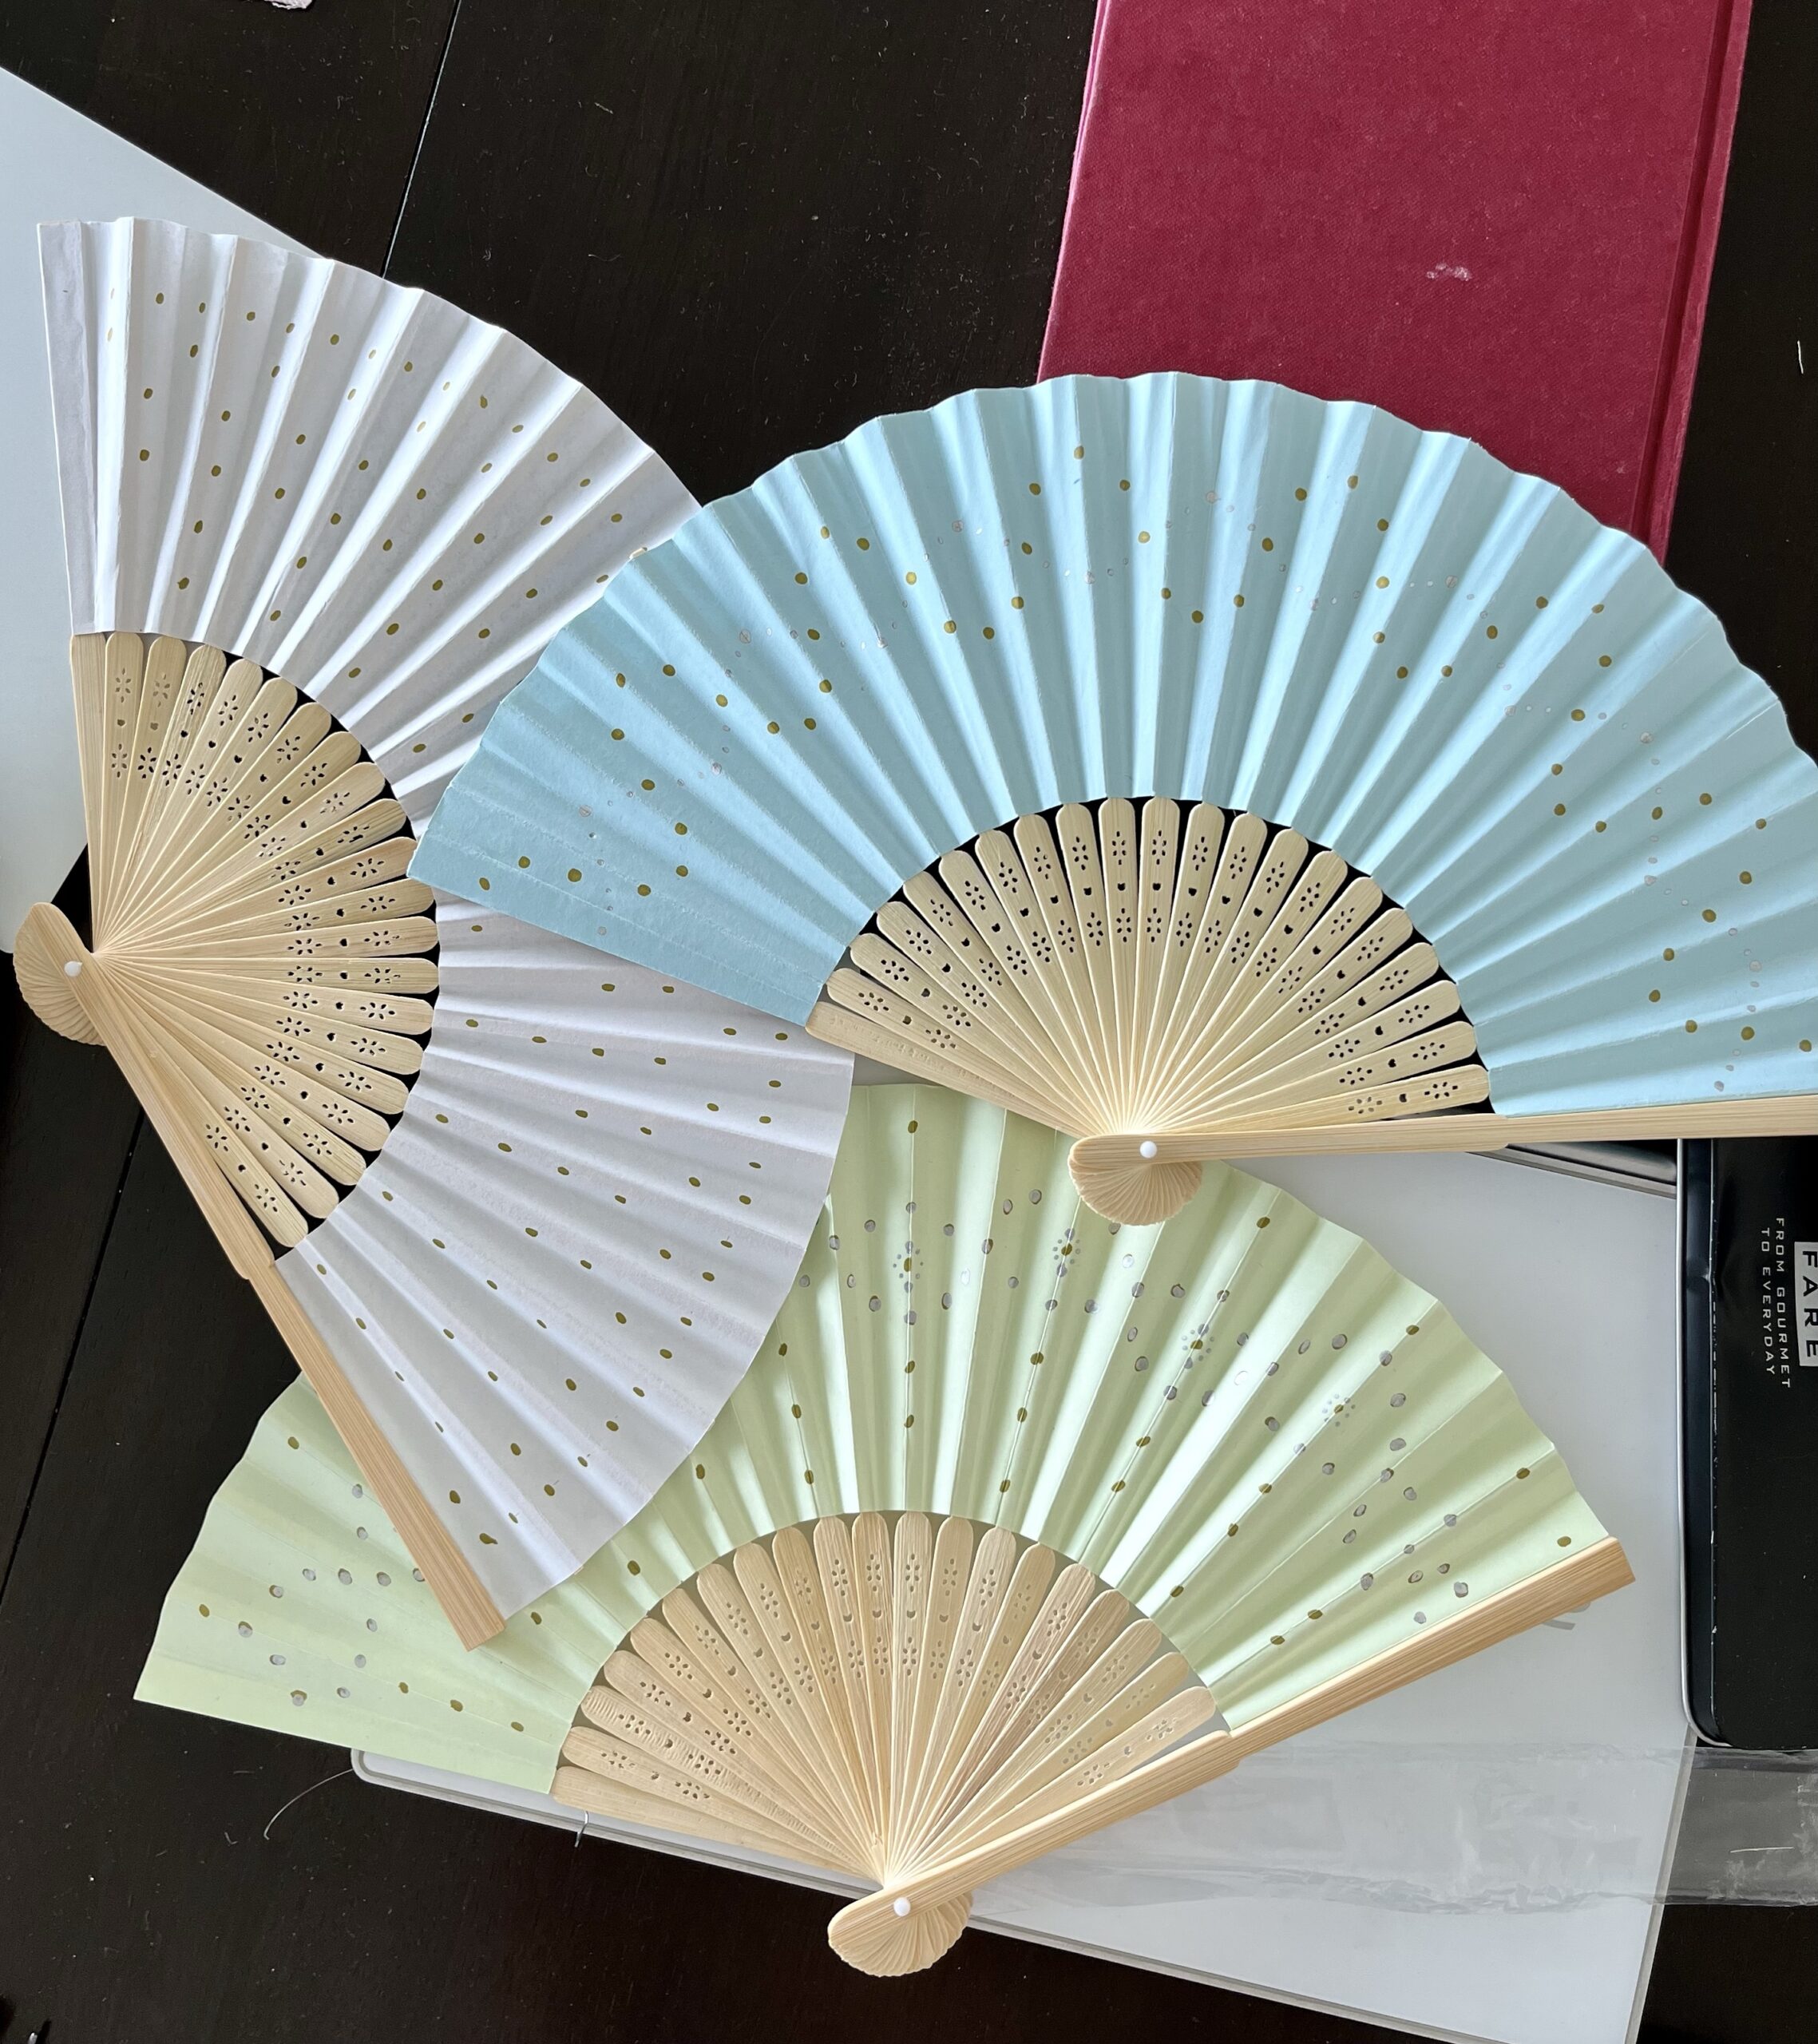 Three paper fans, white blue and green, painted in varying dot patterns with gold and silver pens.